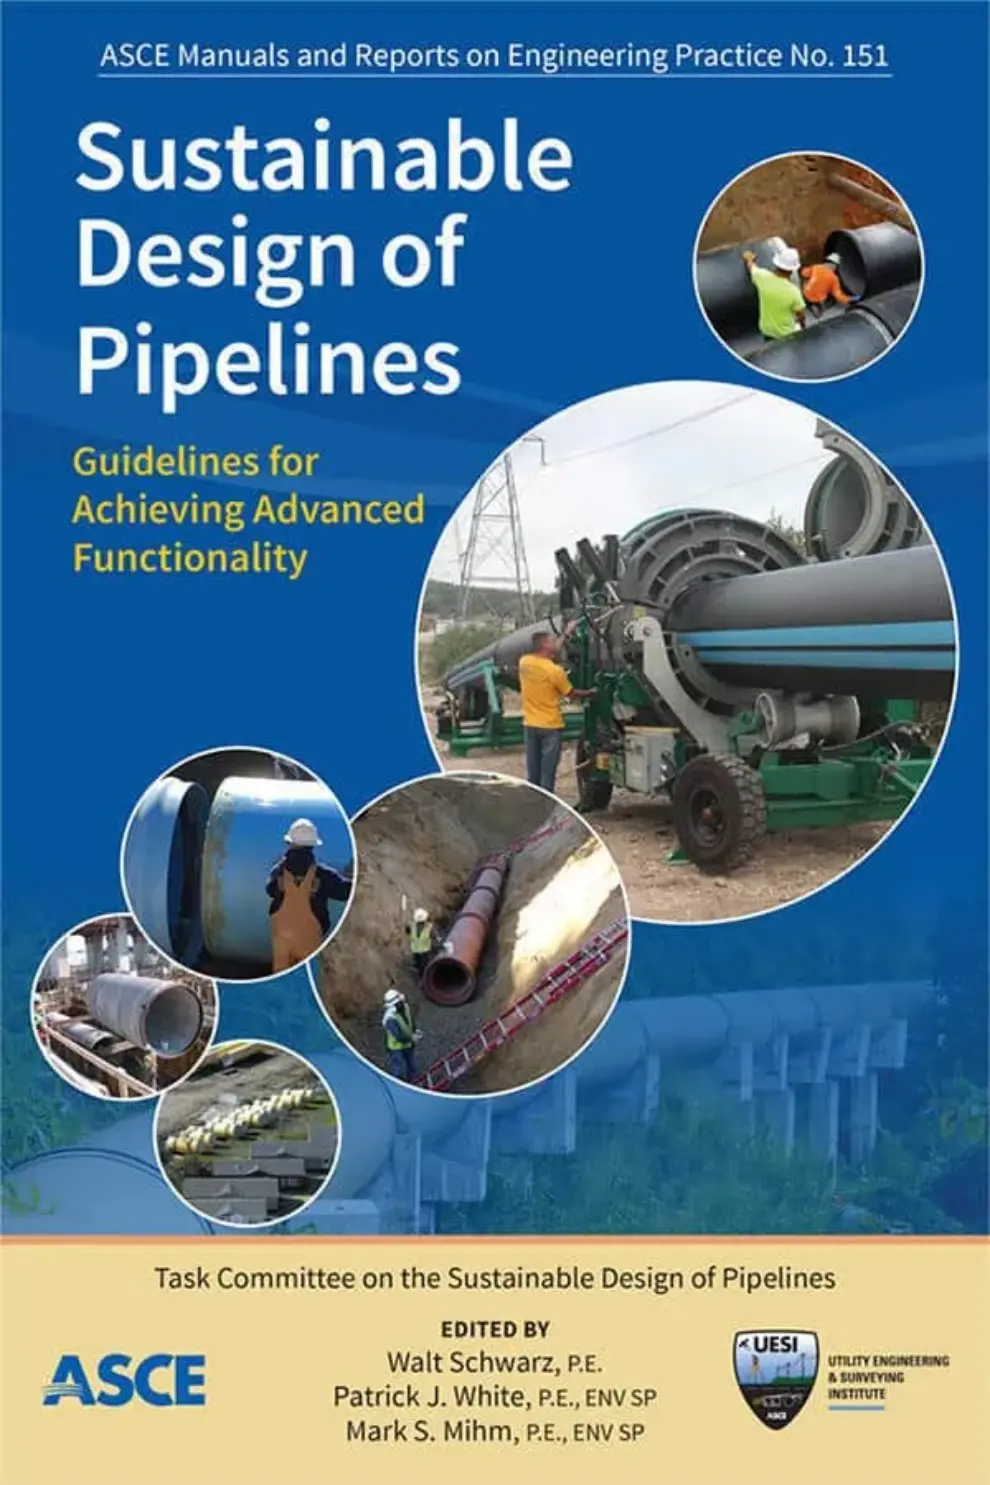 New ASCE Manual of Practice 151 Offers Guidance for Sustainable Planning and Design of Water Pipelines